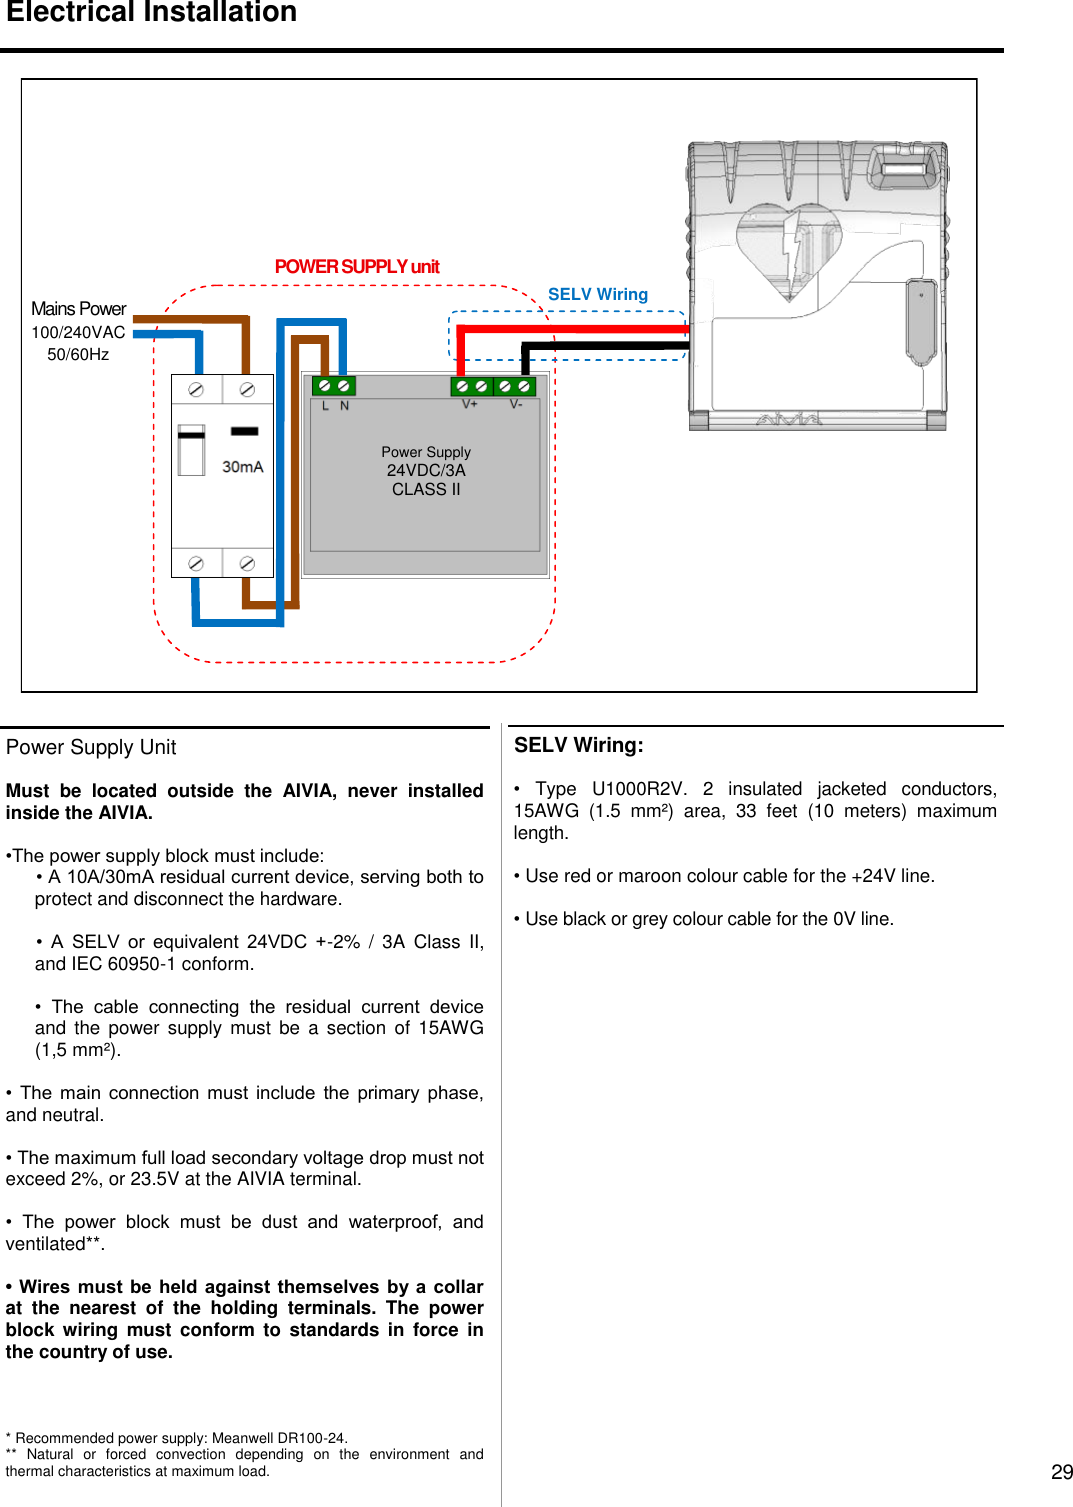  29 Electrical Installation  SELV Wiring:  •  Type  U1000R2V.  2  insulated  jacketed  conductors, 15AWG  (1.5  mm²)  area,  33  feet  (10  meters)  maximum length.  • Use red or maroon colour cable for the +24V line.  • Use black or grey colour cable for the 0V line. POWER SUPPLY unit SELV Wiring Mains Power 100/240VAC 50/60Hz Power Supply 24VDC/3A CLASS II Power Supply Unit  Must  be  located  outside  the  AIVIA,  never  installed inside the AIVIA.  •The power supply block must include: • A 10A/30mA residual current device, serving both to protect and disconnect the hardware.  •  A  SELV  or  equivalent  24VDC  +-2%  /  3A  Class  II, and IEC 60950-1 conform.  •  The  cable  connecting  the  residual  current  device and  the  power supply must  be  a  section  of  15AWG (1,5 mm²).  •  The  main  connection  must  include  the  primary  phase, and neutral.  • The maximum full load secondary voltage drop must not exceed 2%, or 23.5V at the AIVIA terminal.  •  The  power  block  must  be  dust  and  waterproof,  and ventilated**.  • Wires  must be  held against themselves  by  a collar at  the  nearest  of  the  holding  terminals.  The  power block  wiring  must  conform  to  standards in  force  in the country of use.     * Recommended power supply: Meanwell DR100-24. **  Natural  or  forced  convection  depending  on  the  environment  and thermal characteristics at maximum load. 